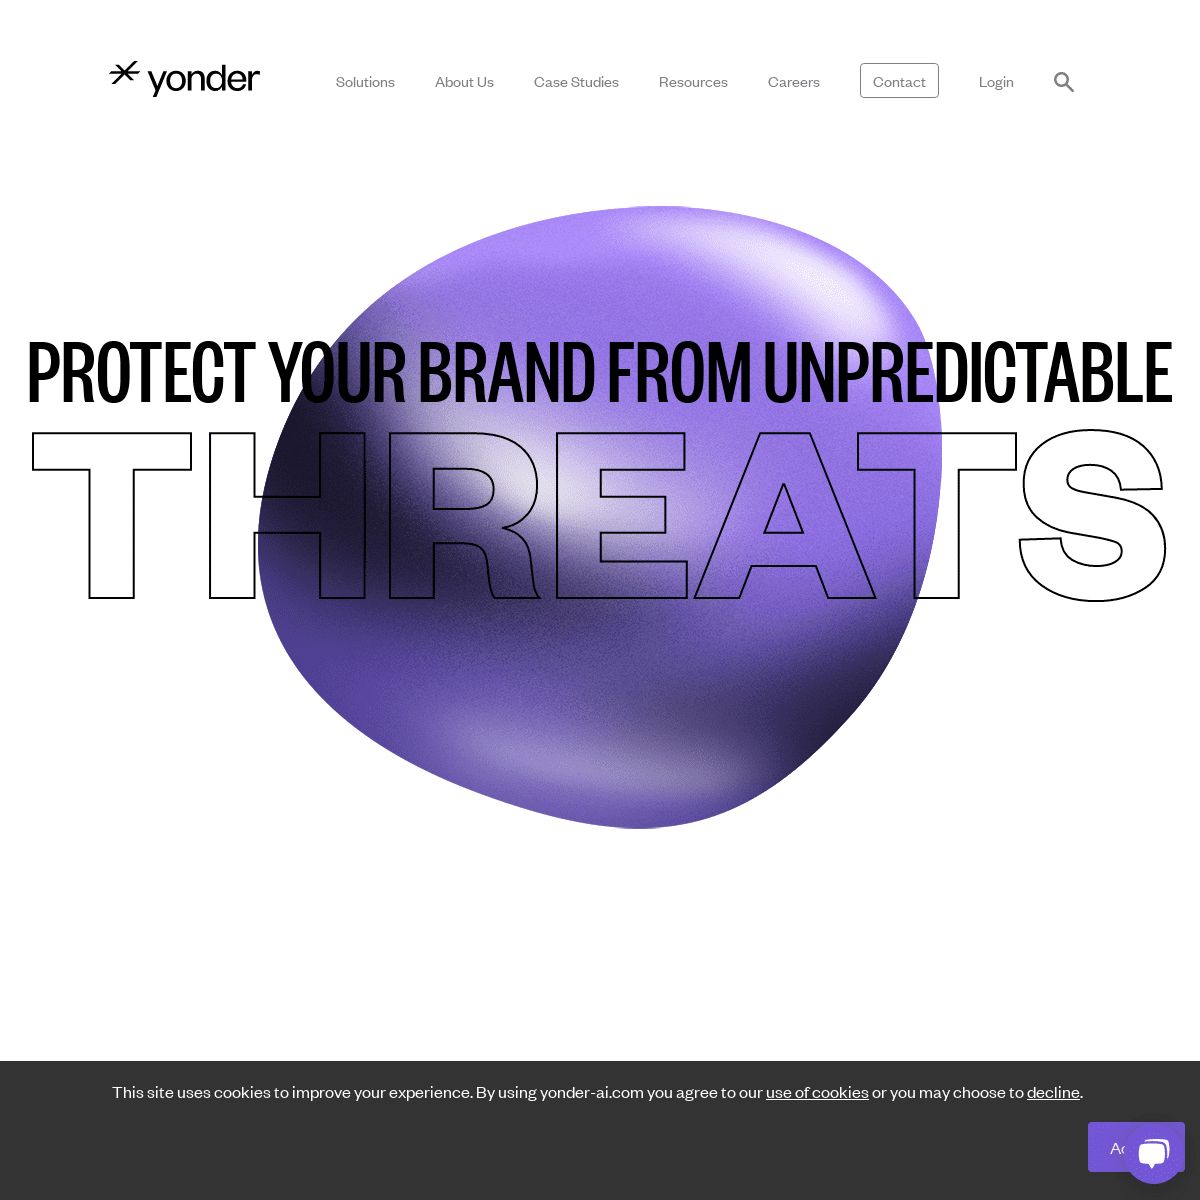 A complete backup of https://yonder-ai.com